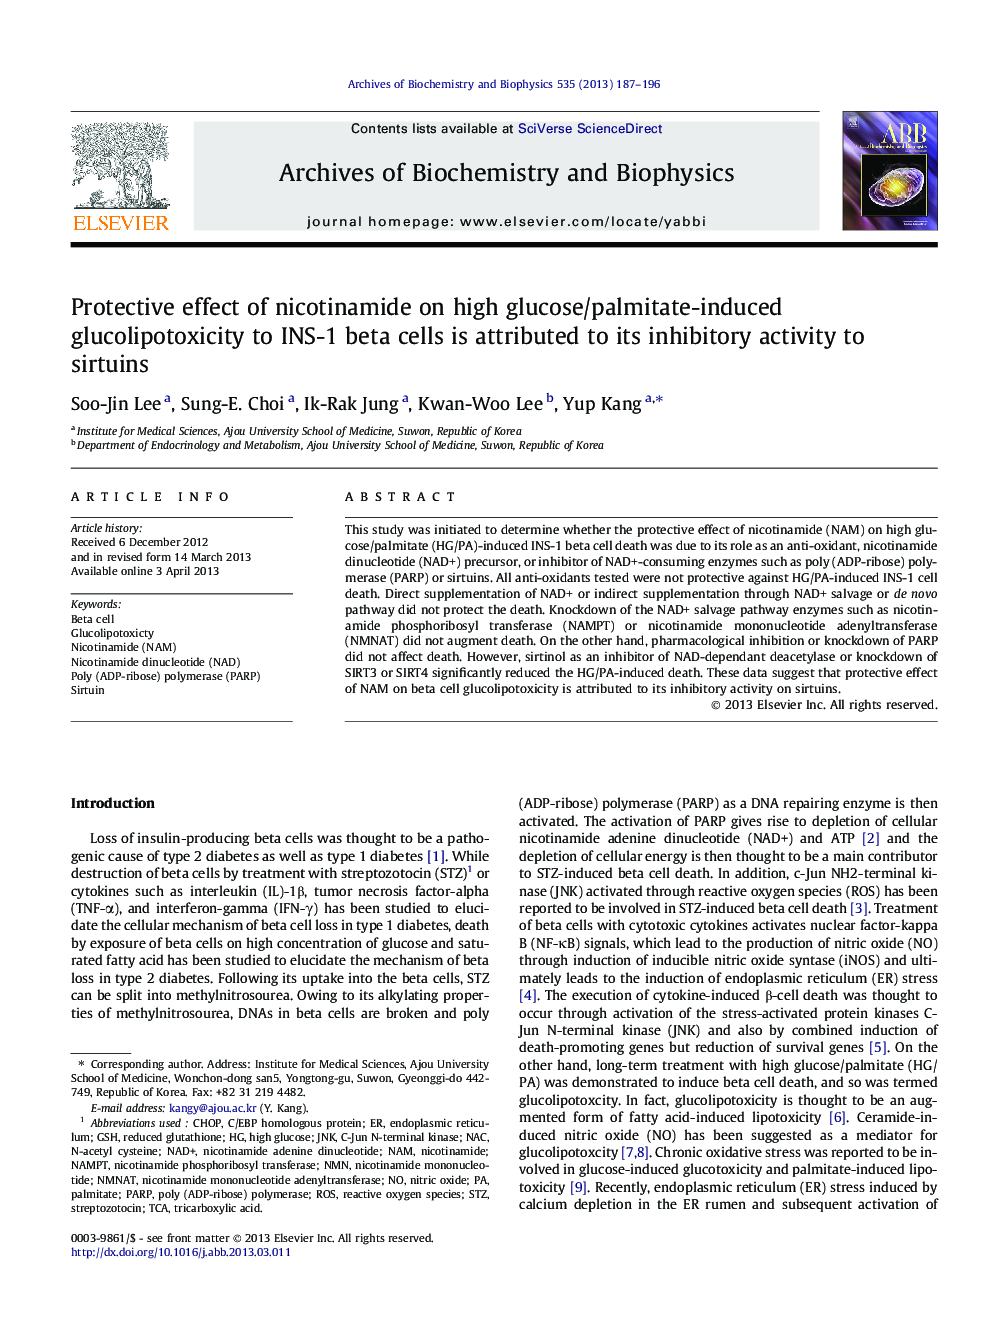 Protective effect of nicotinamide on high glucose/palmitate-induced glucolipotoxicity to INS-1 beta cells is attributed to its inhibitory activity to sirtuins